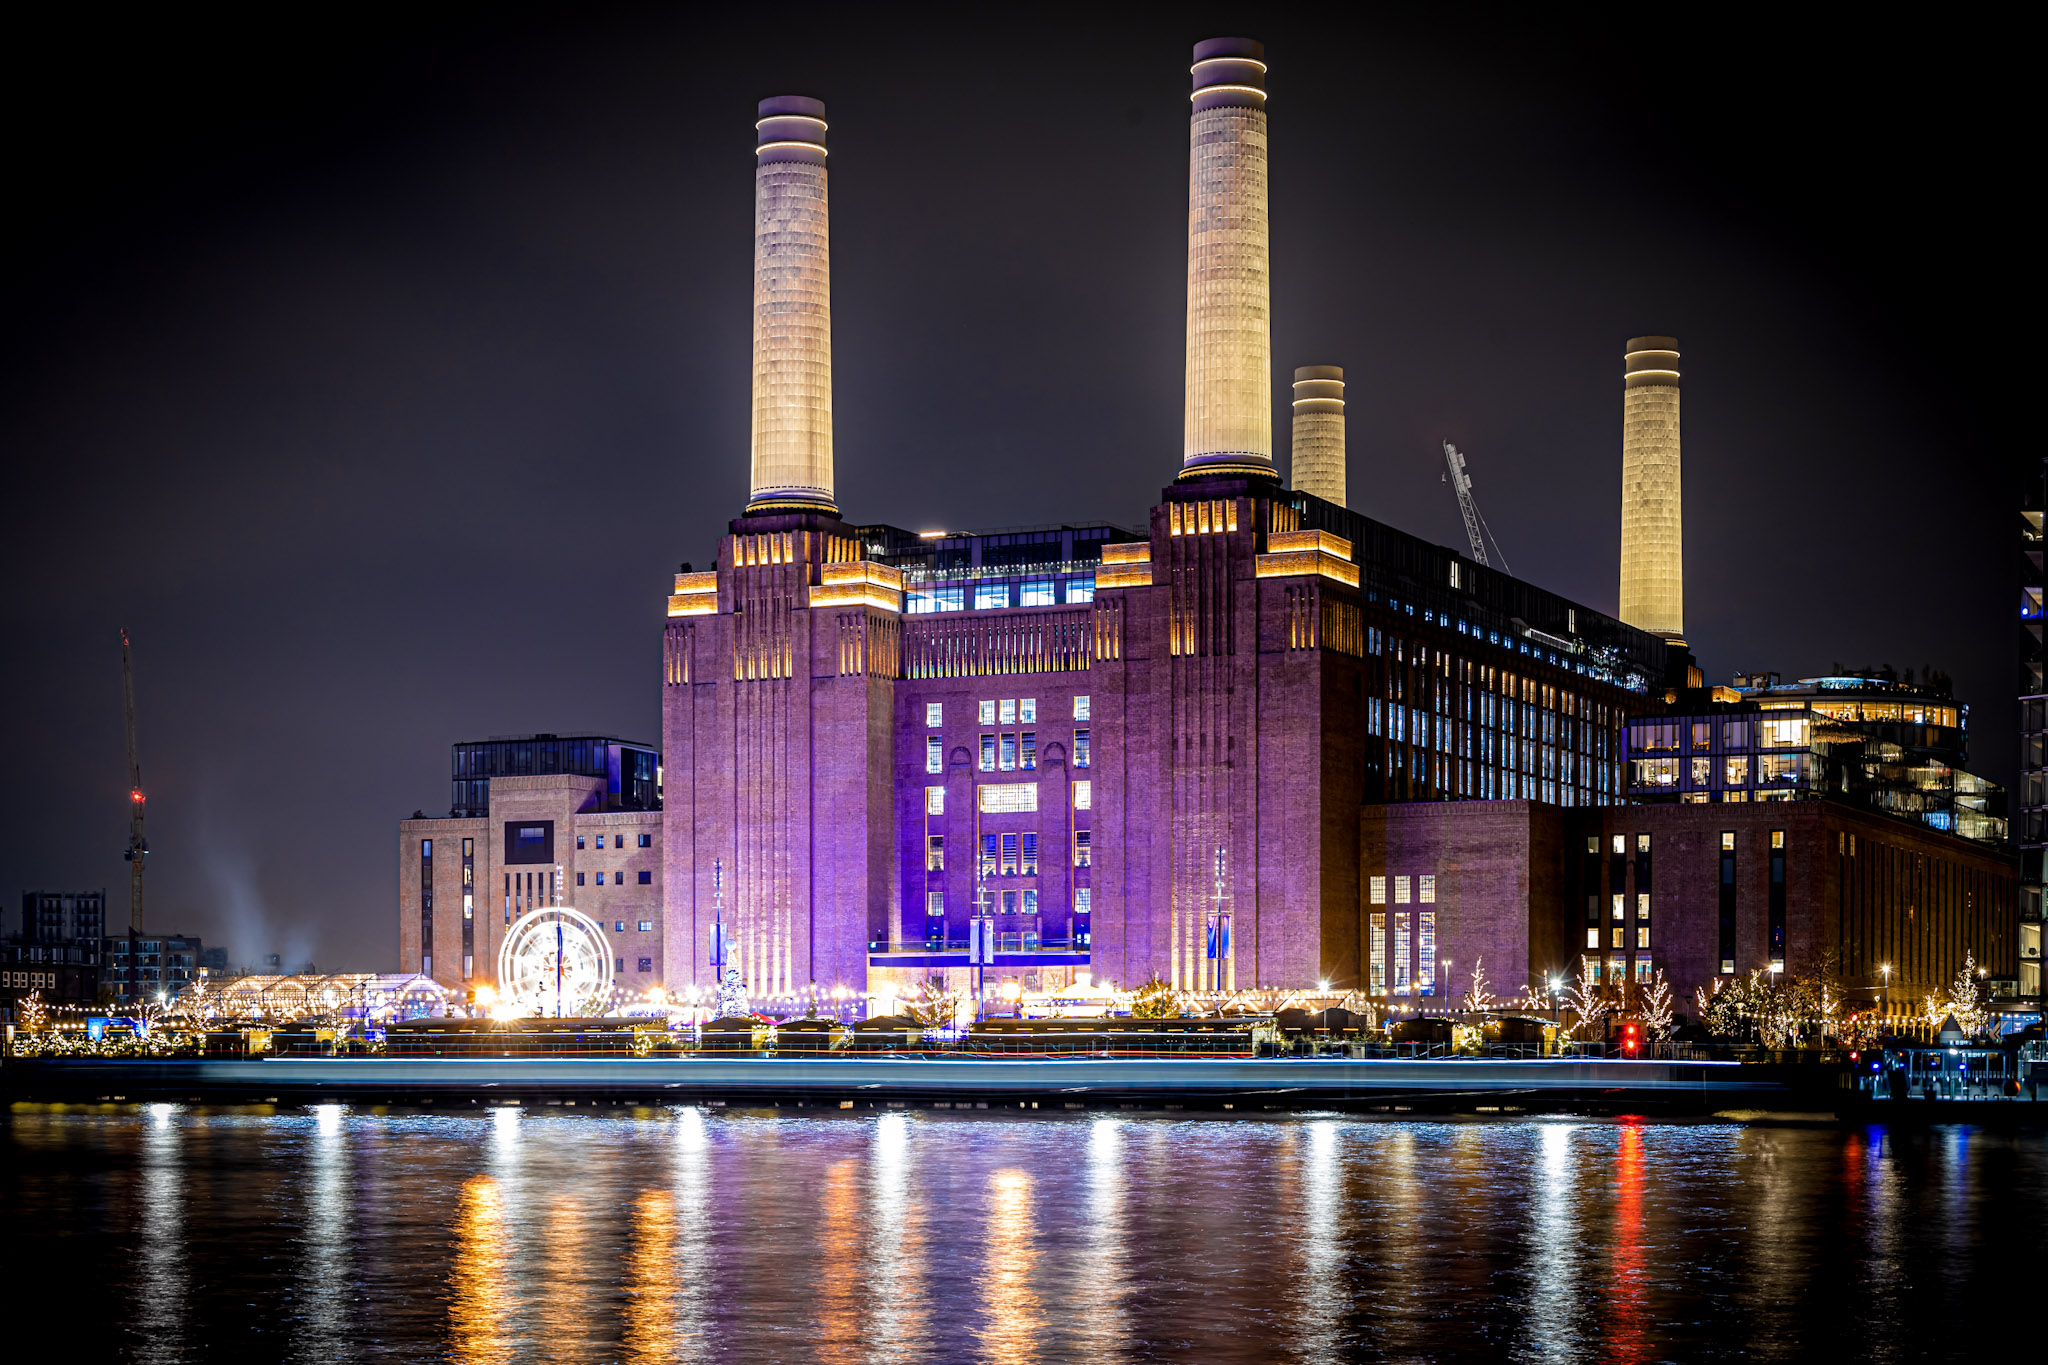 stock image of the former Battersea Power Station in London